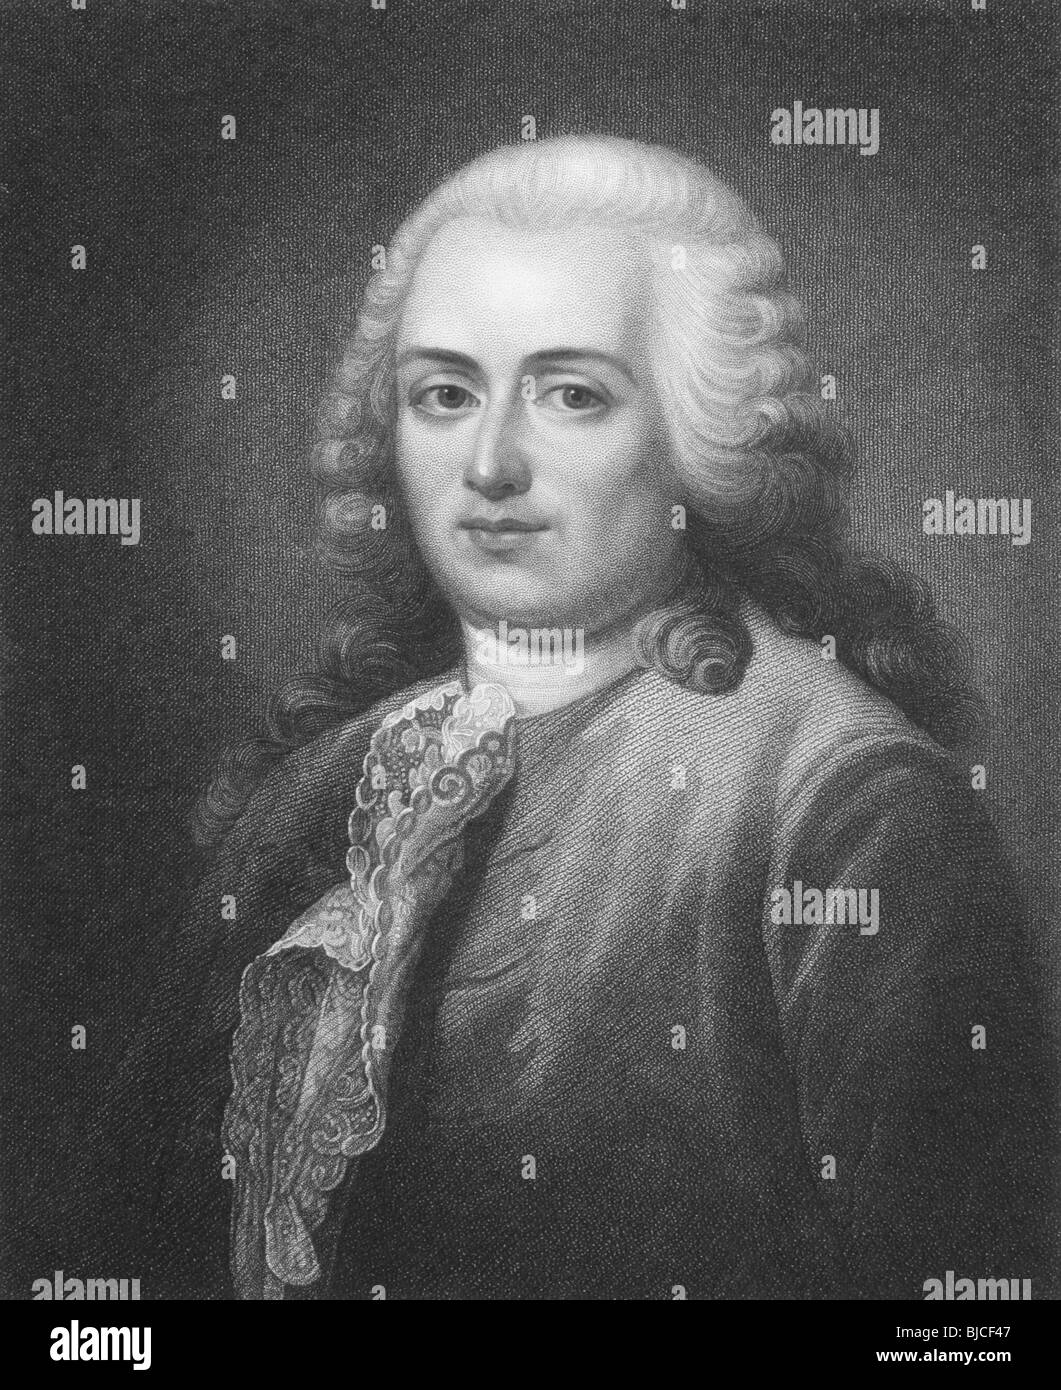 Turgot (1727-1781) on engraving from the 1800s. French economist  and statesman. Stock Photo